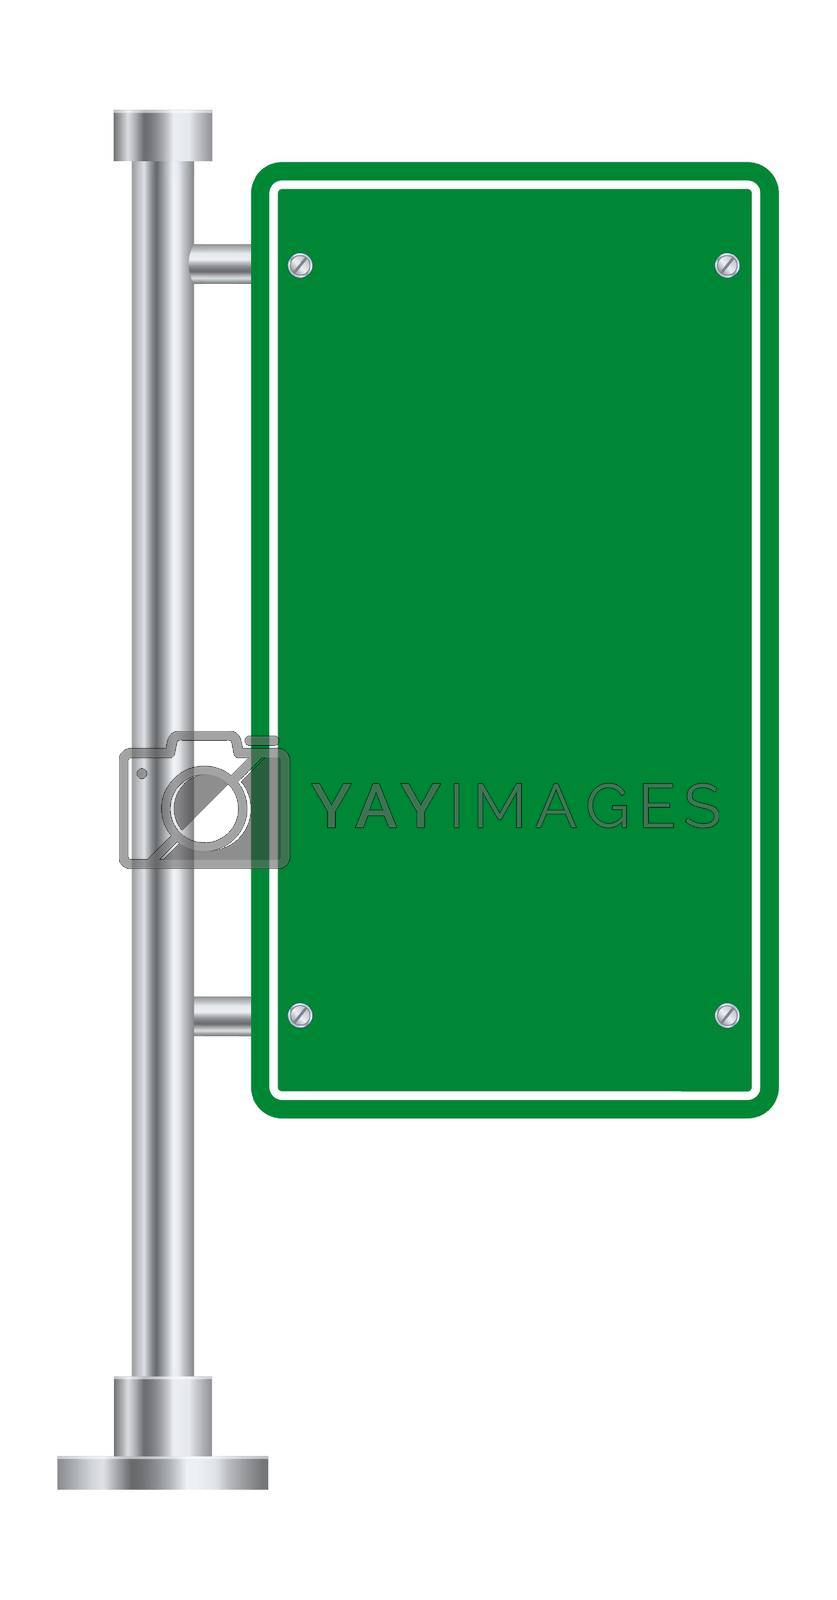 Royalty free image of Empty street information board. Green road sign by LadadikArt